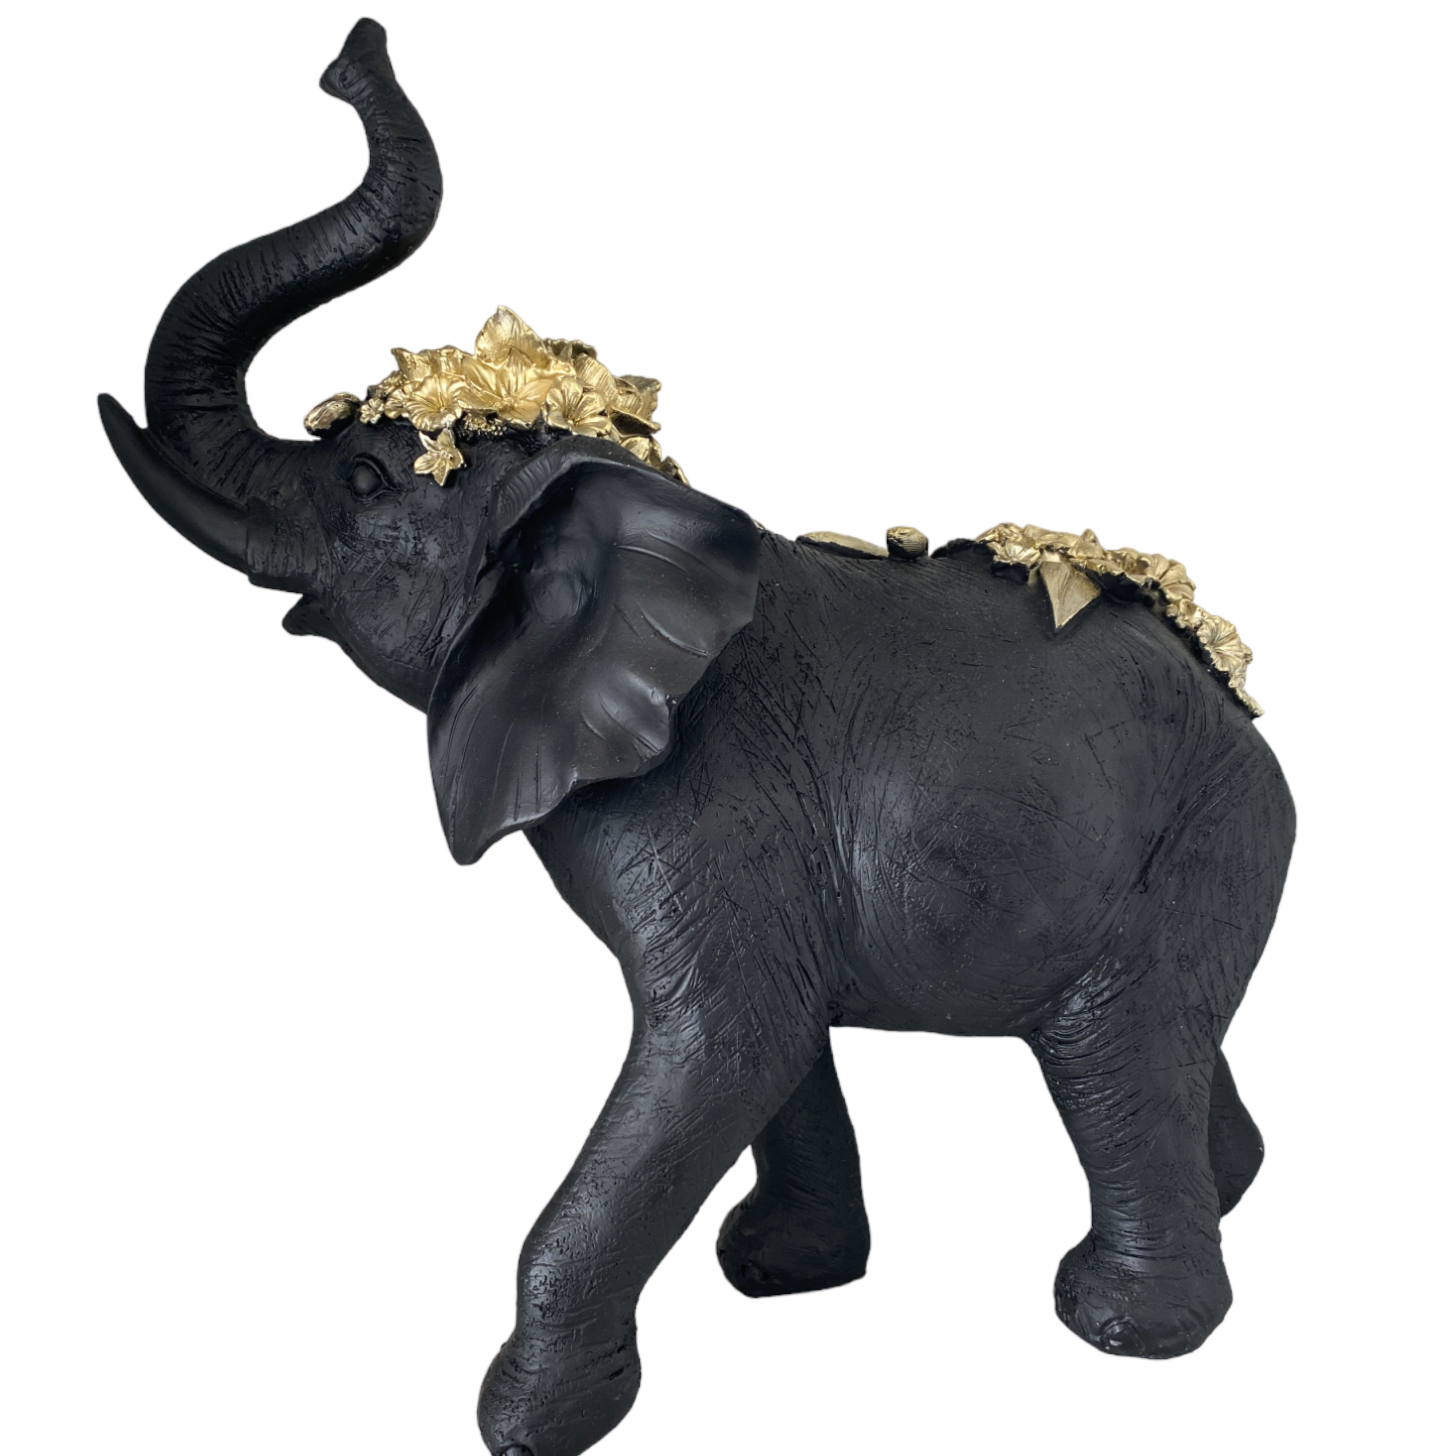 Elephant Black with Gold Garlands